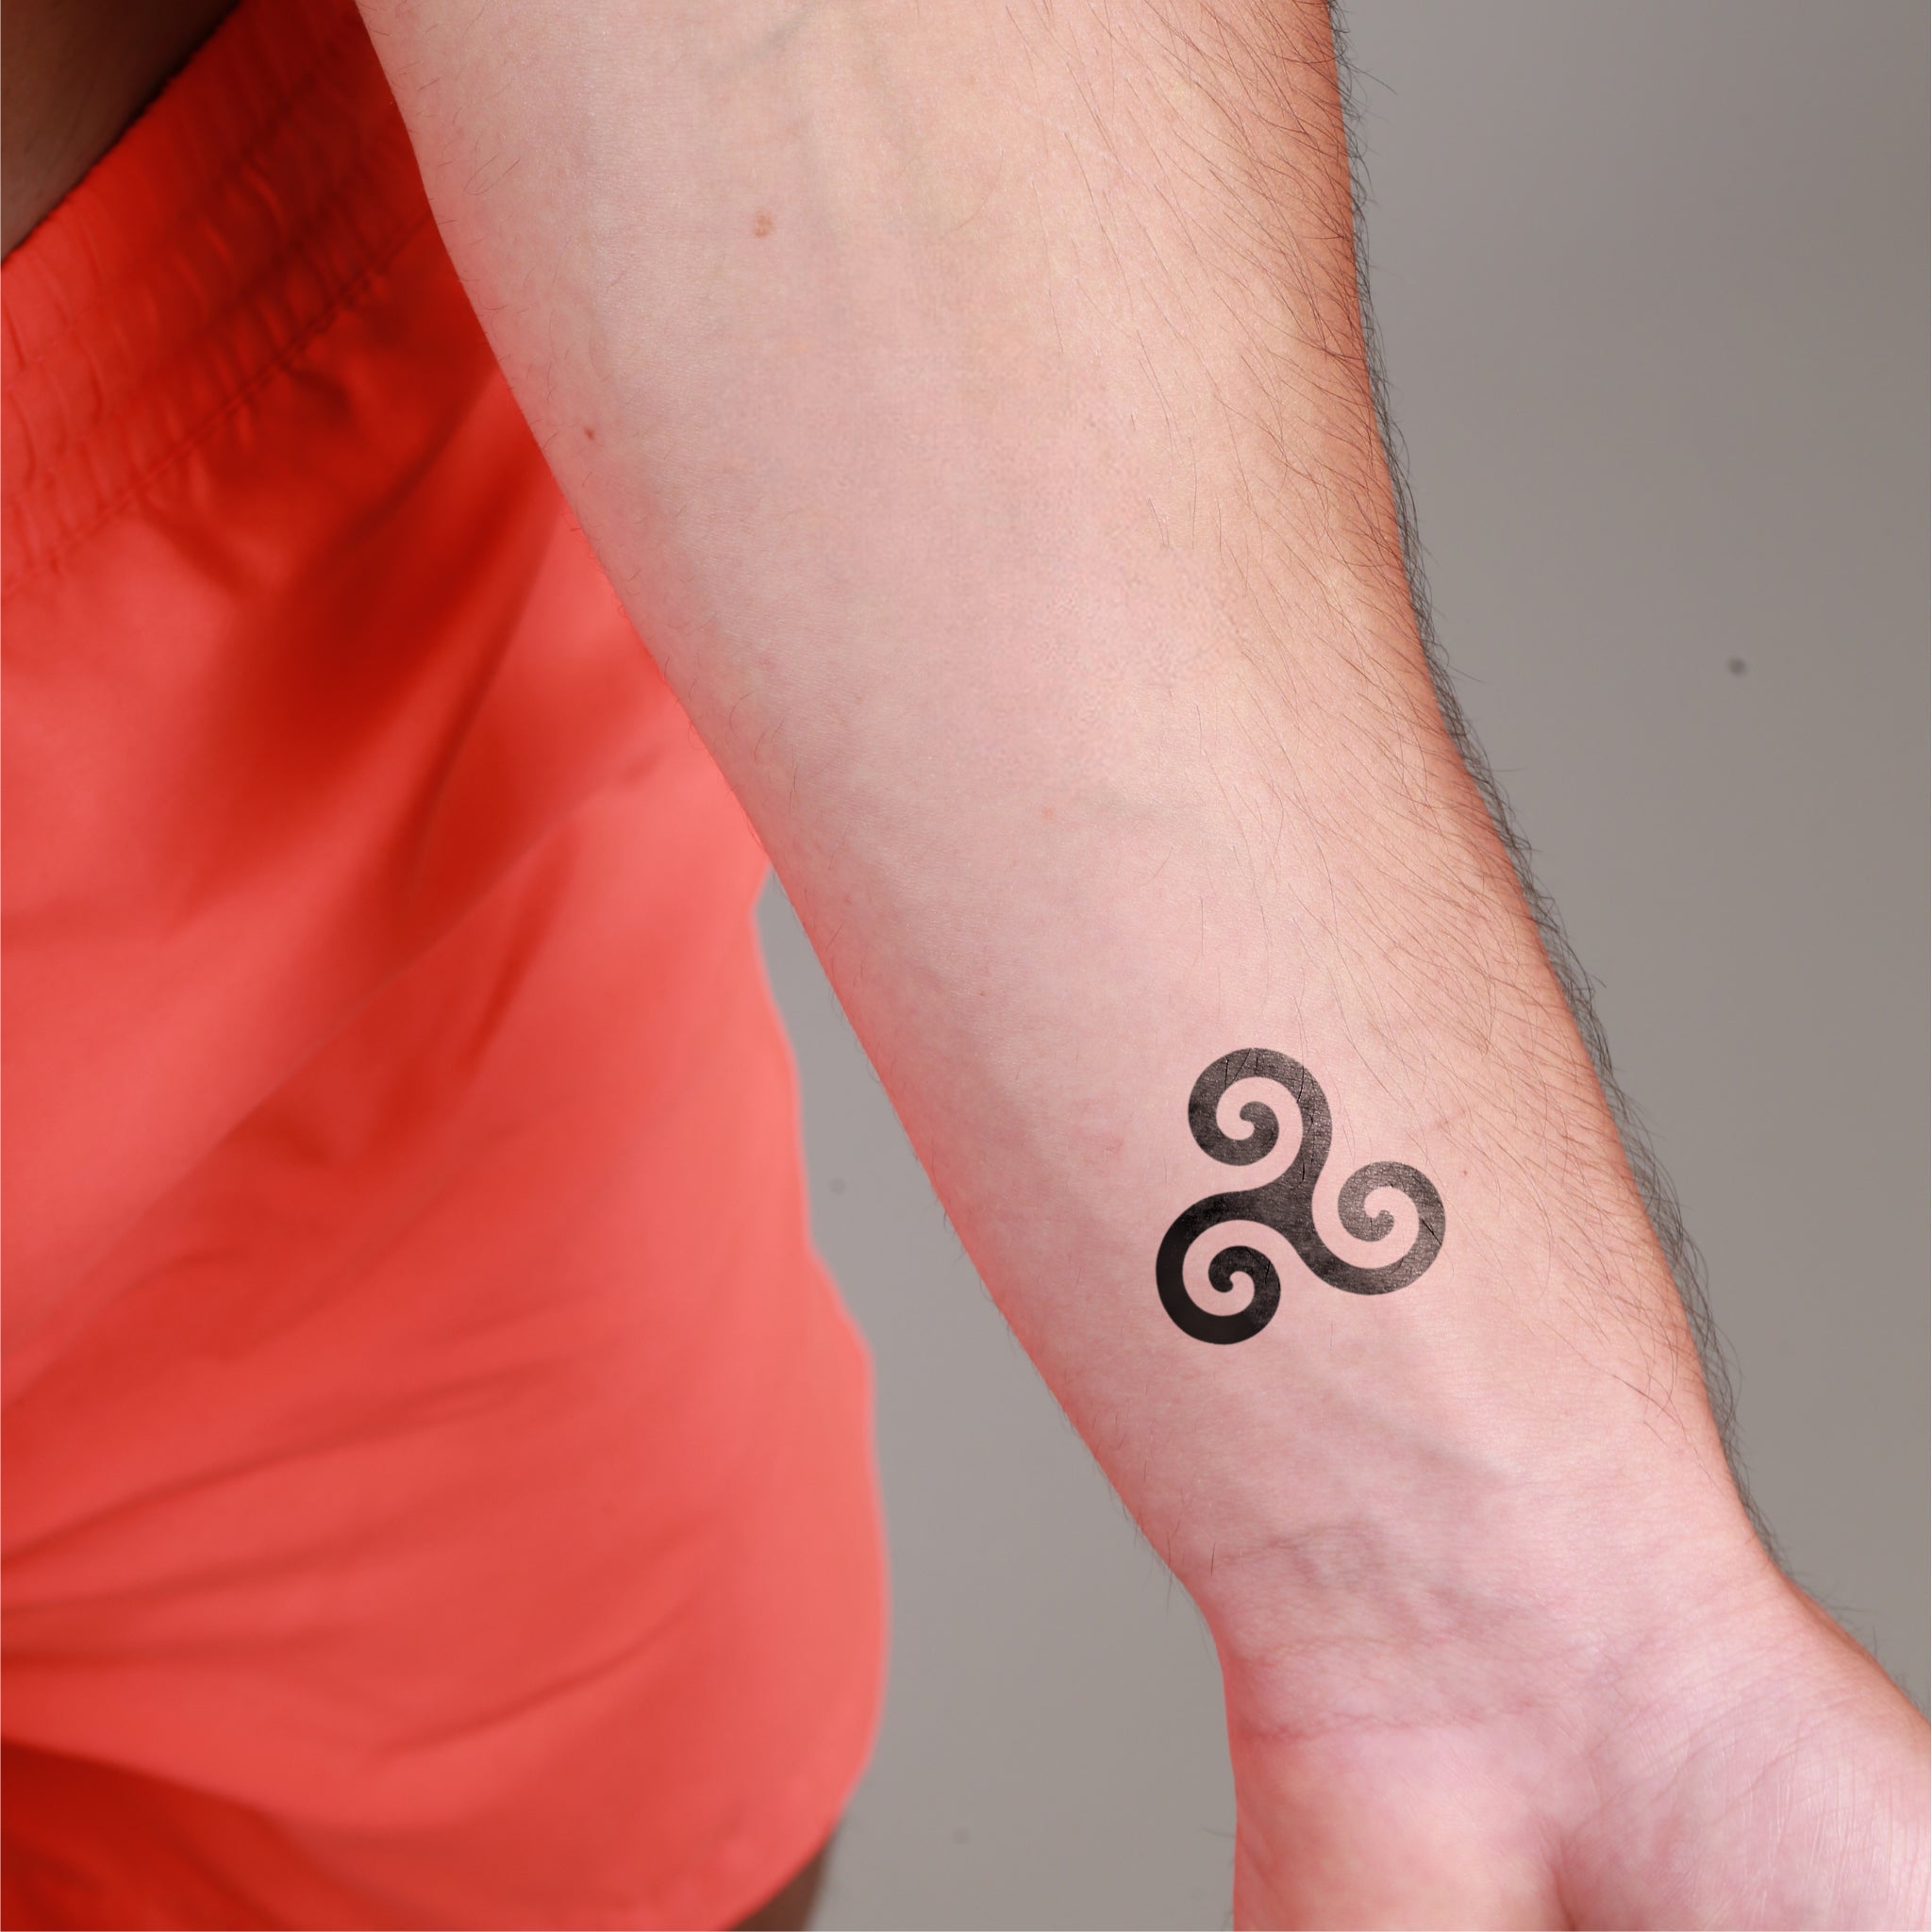 Amazon.com : Triskele Triskelion Triple Spiral Celtic Symbol Temporary  Tattoo Water Resistant Fake Body Art Set Collection - Purple (One Sheet) :  Beauty & Personal Care